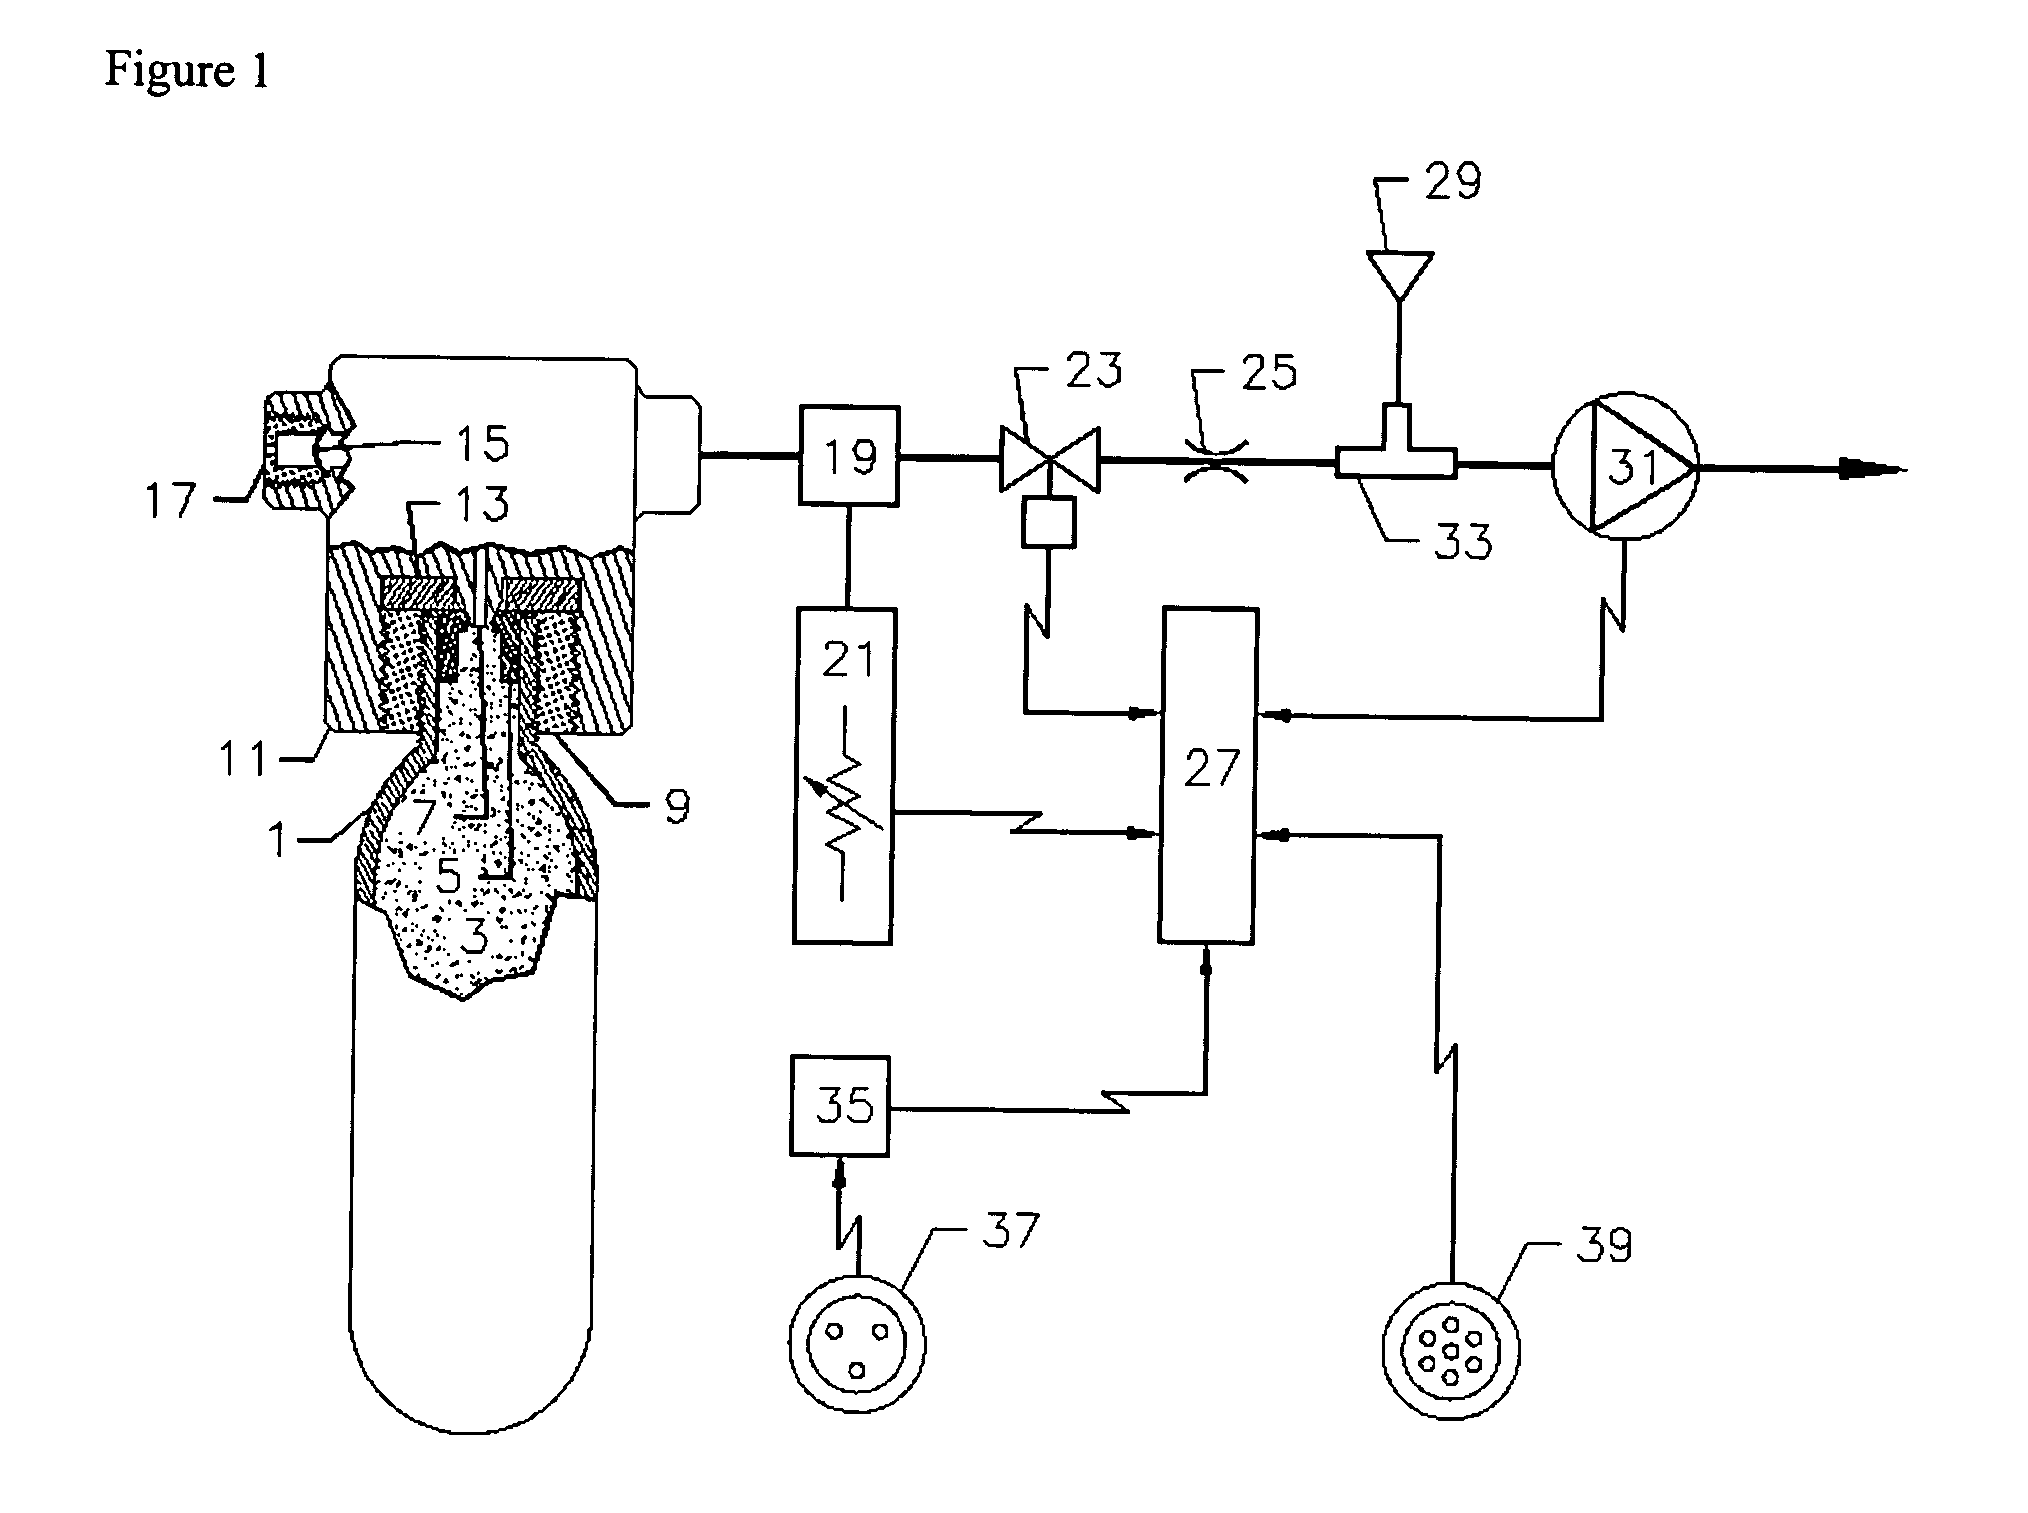 Apparatus and method for generating calibration gas